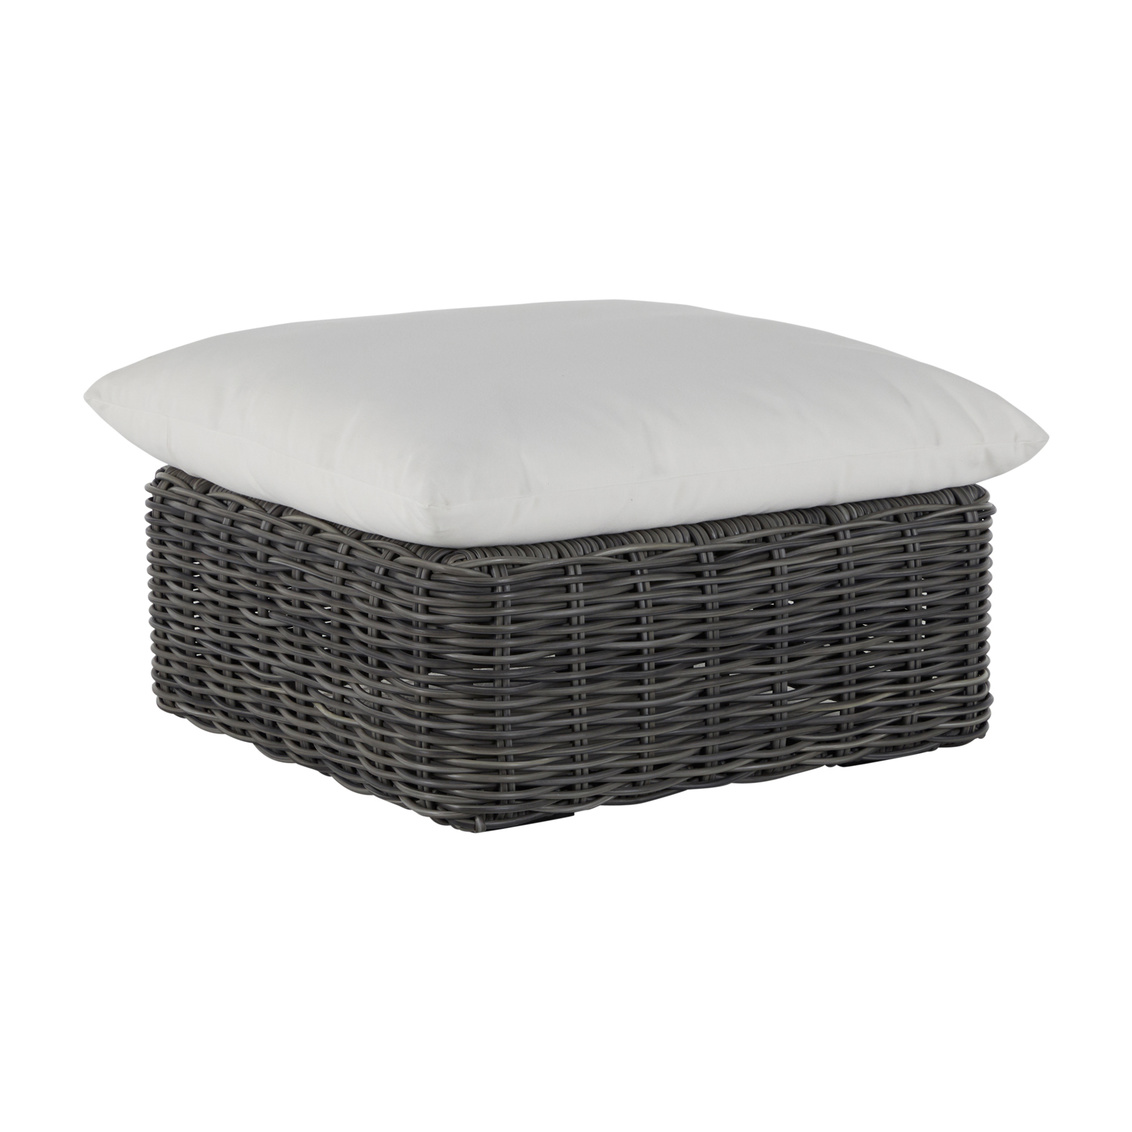 montecito woven ottoman in slate grey – frame only product image